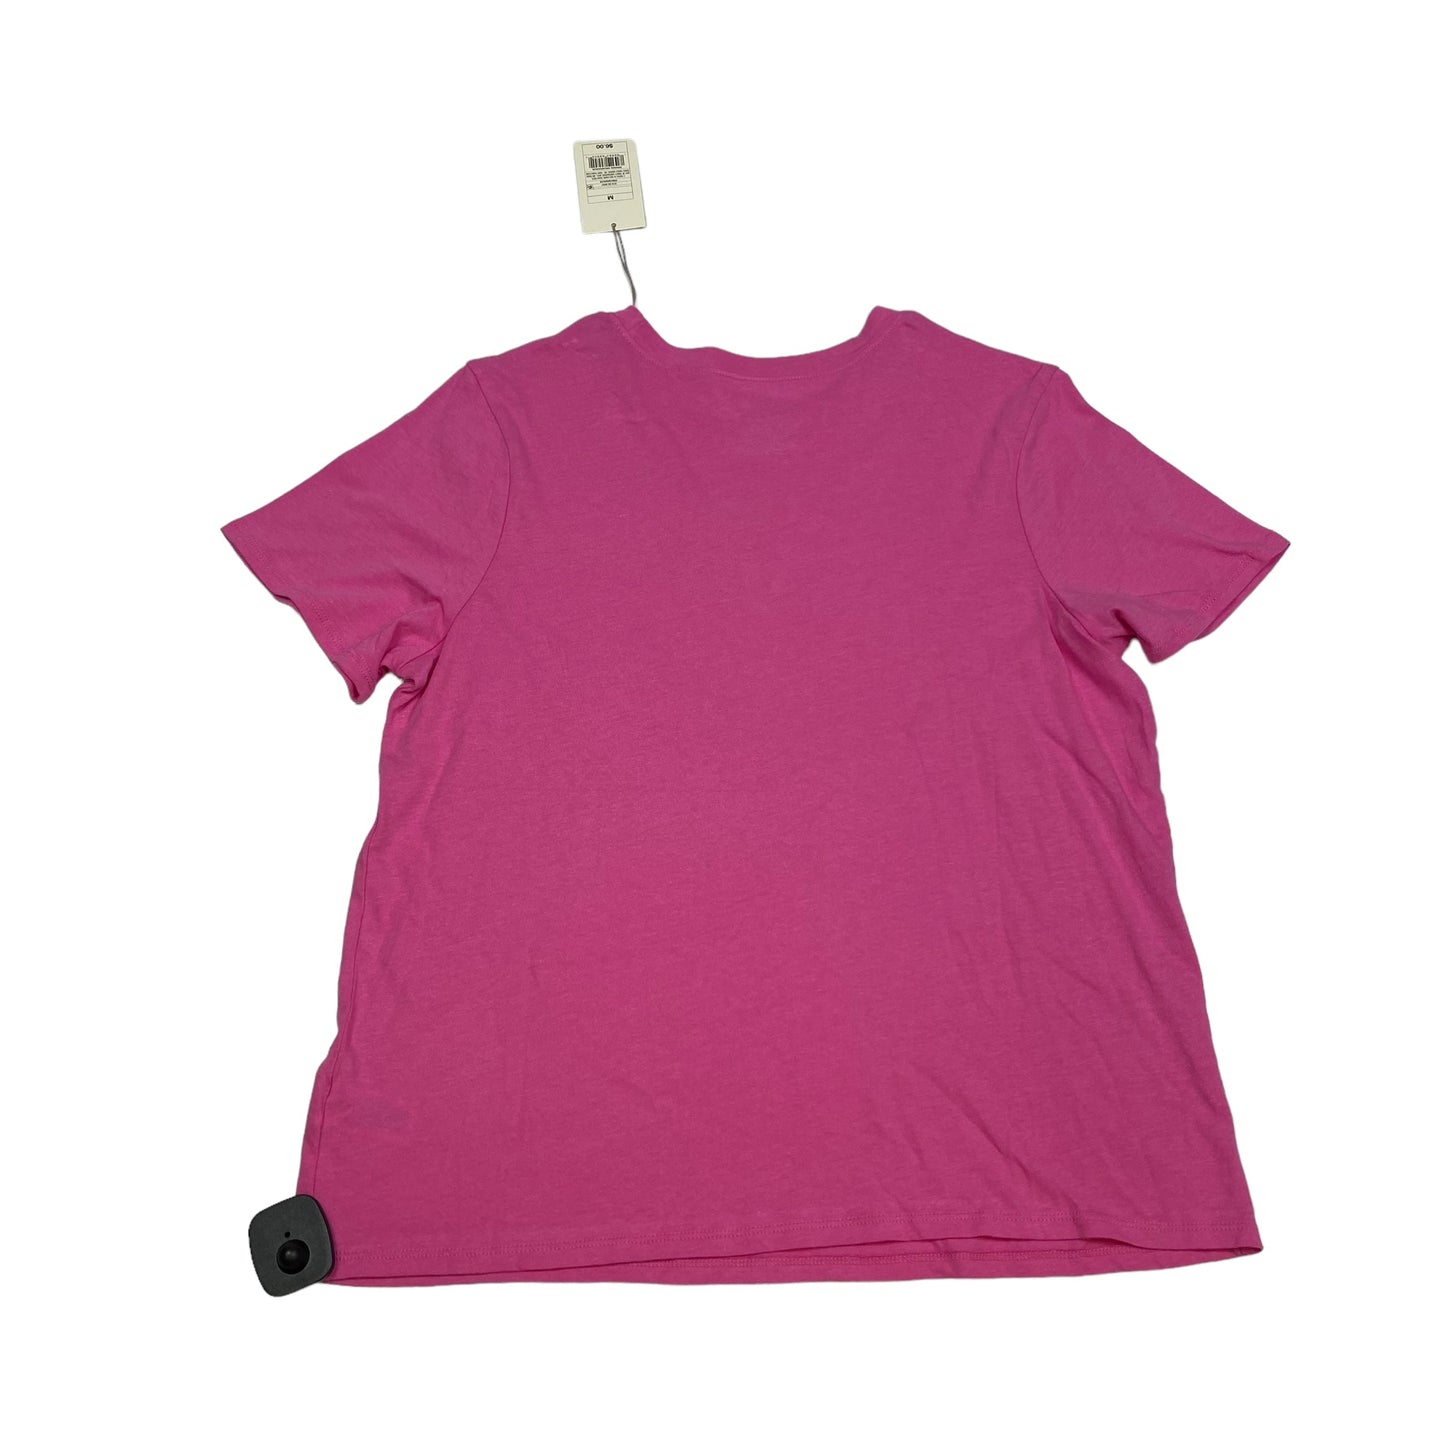 Pink Top Short Sleeve Basic A New Day, Size M